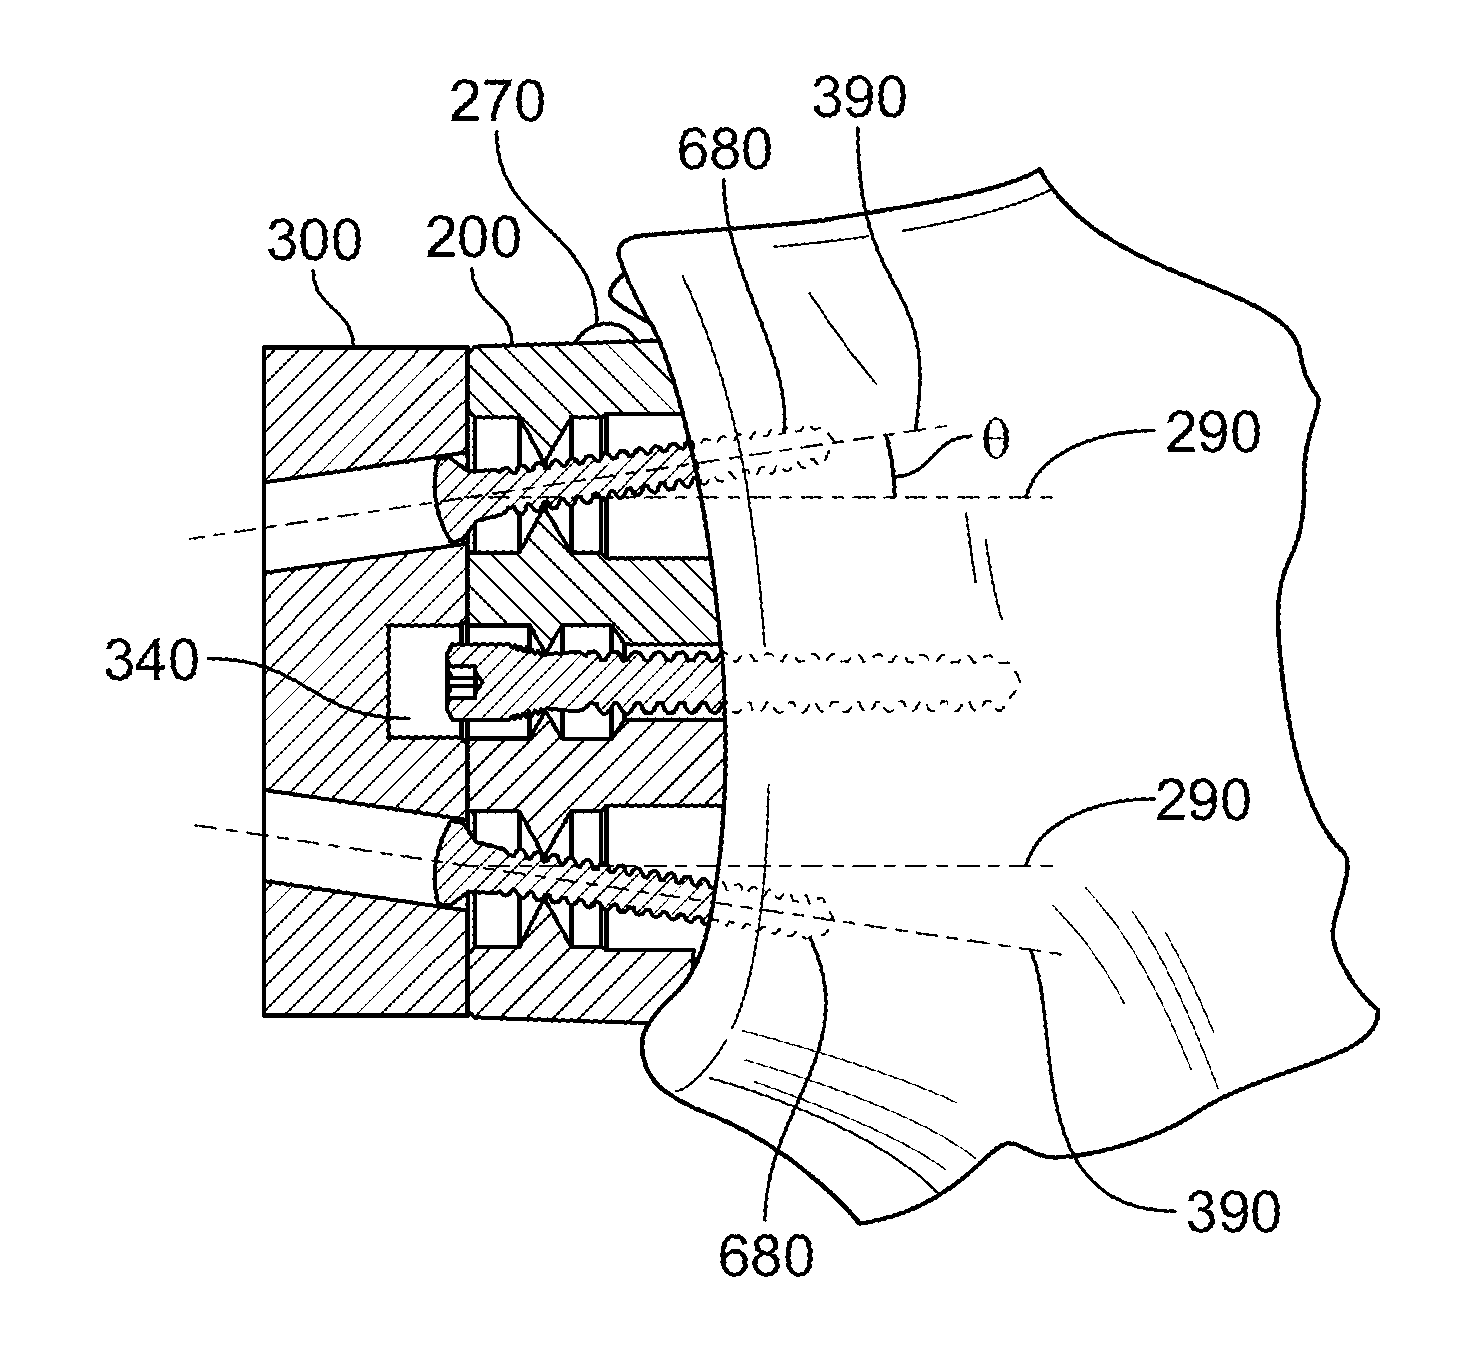 Shape-fit glenoid reaming systems and methods